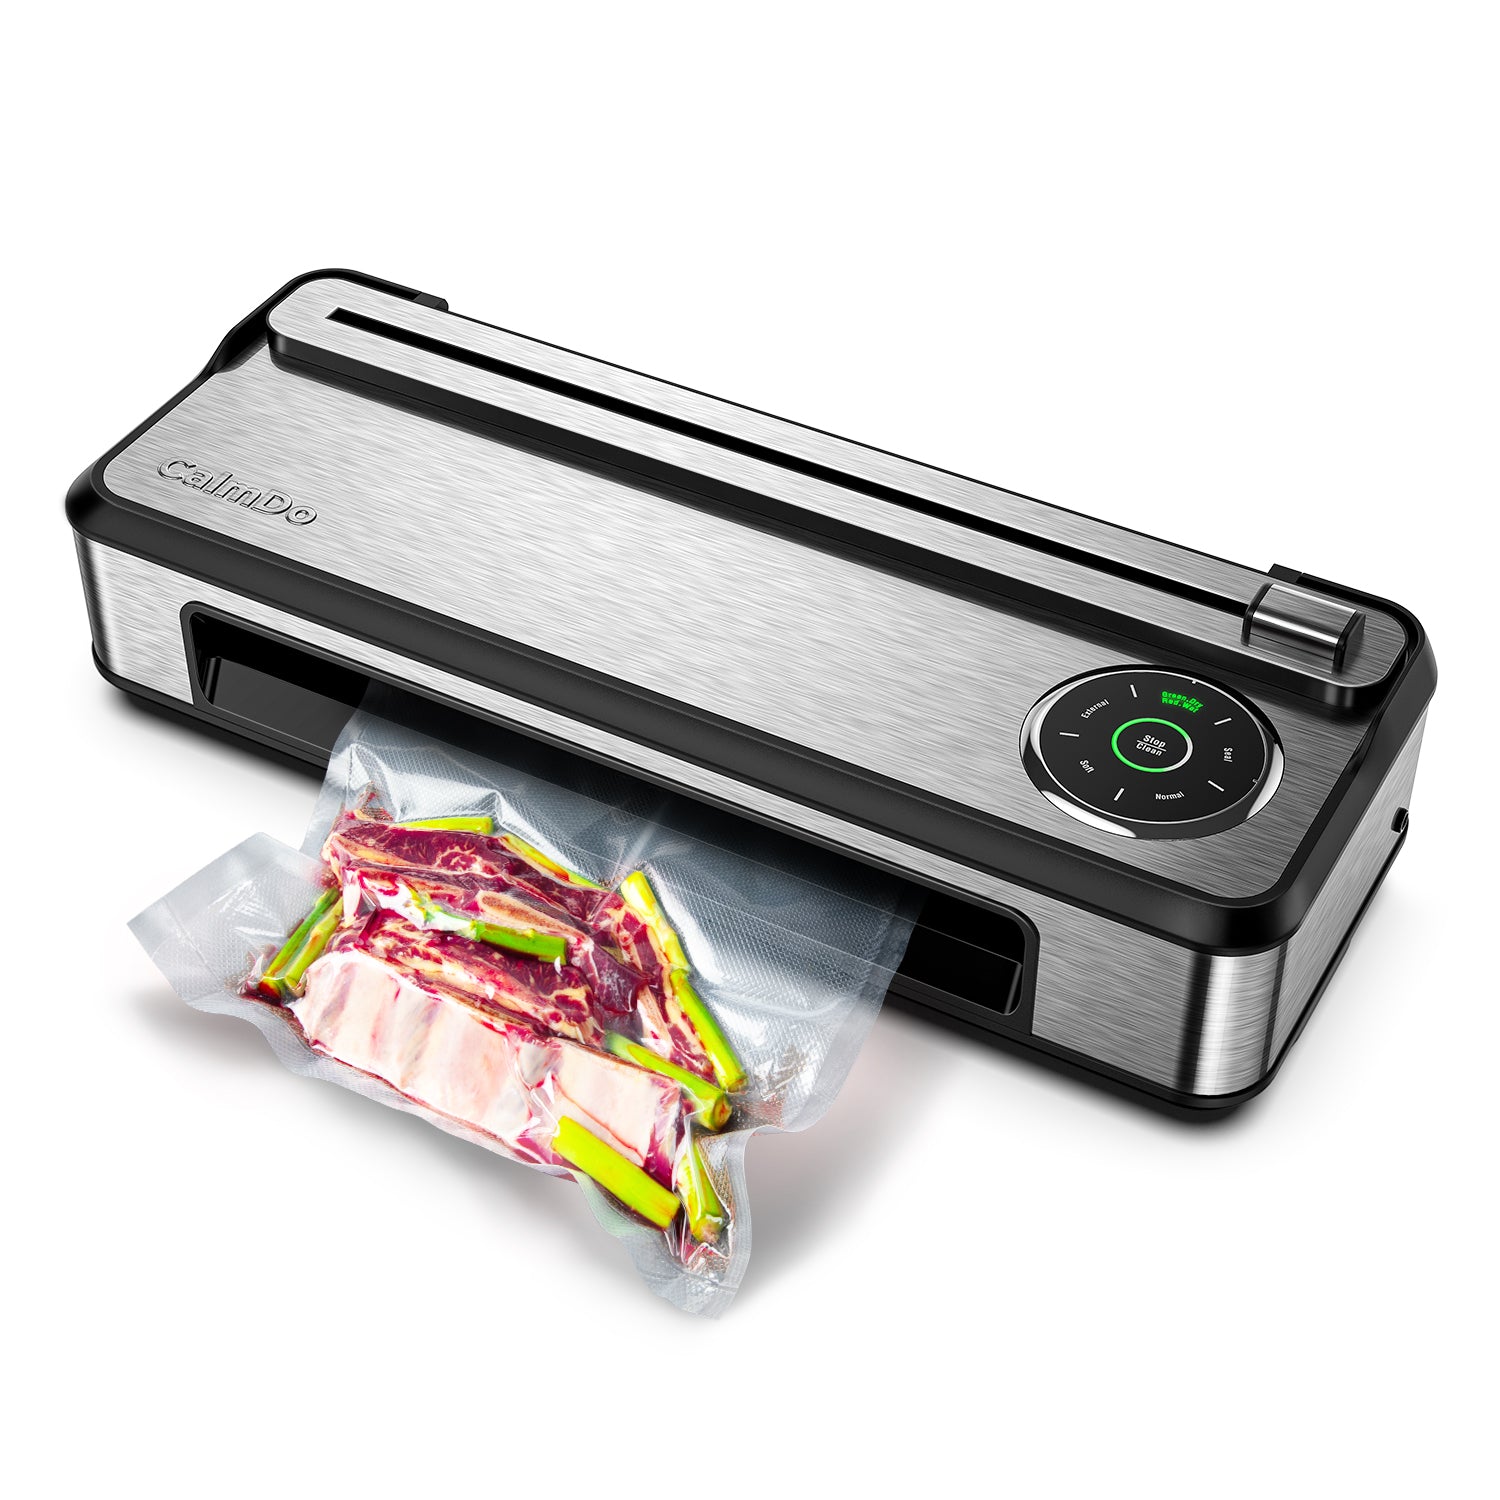 Koios Vacuum Sealer, 80Kpa Automatic Food Sealer with Cutter with